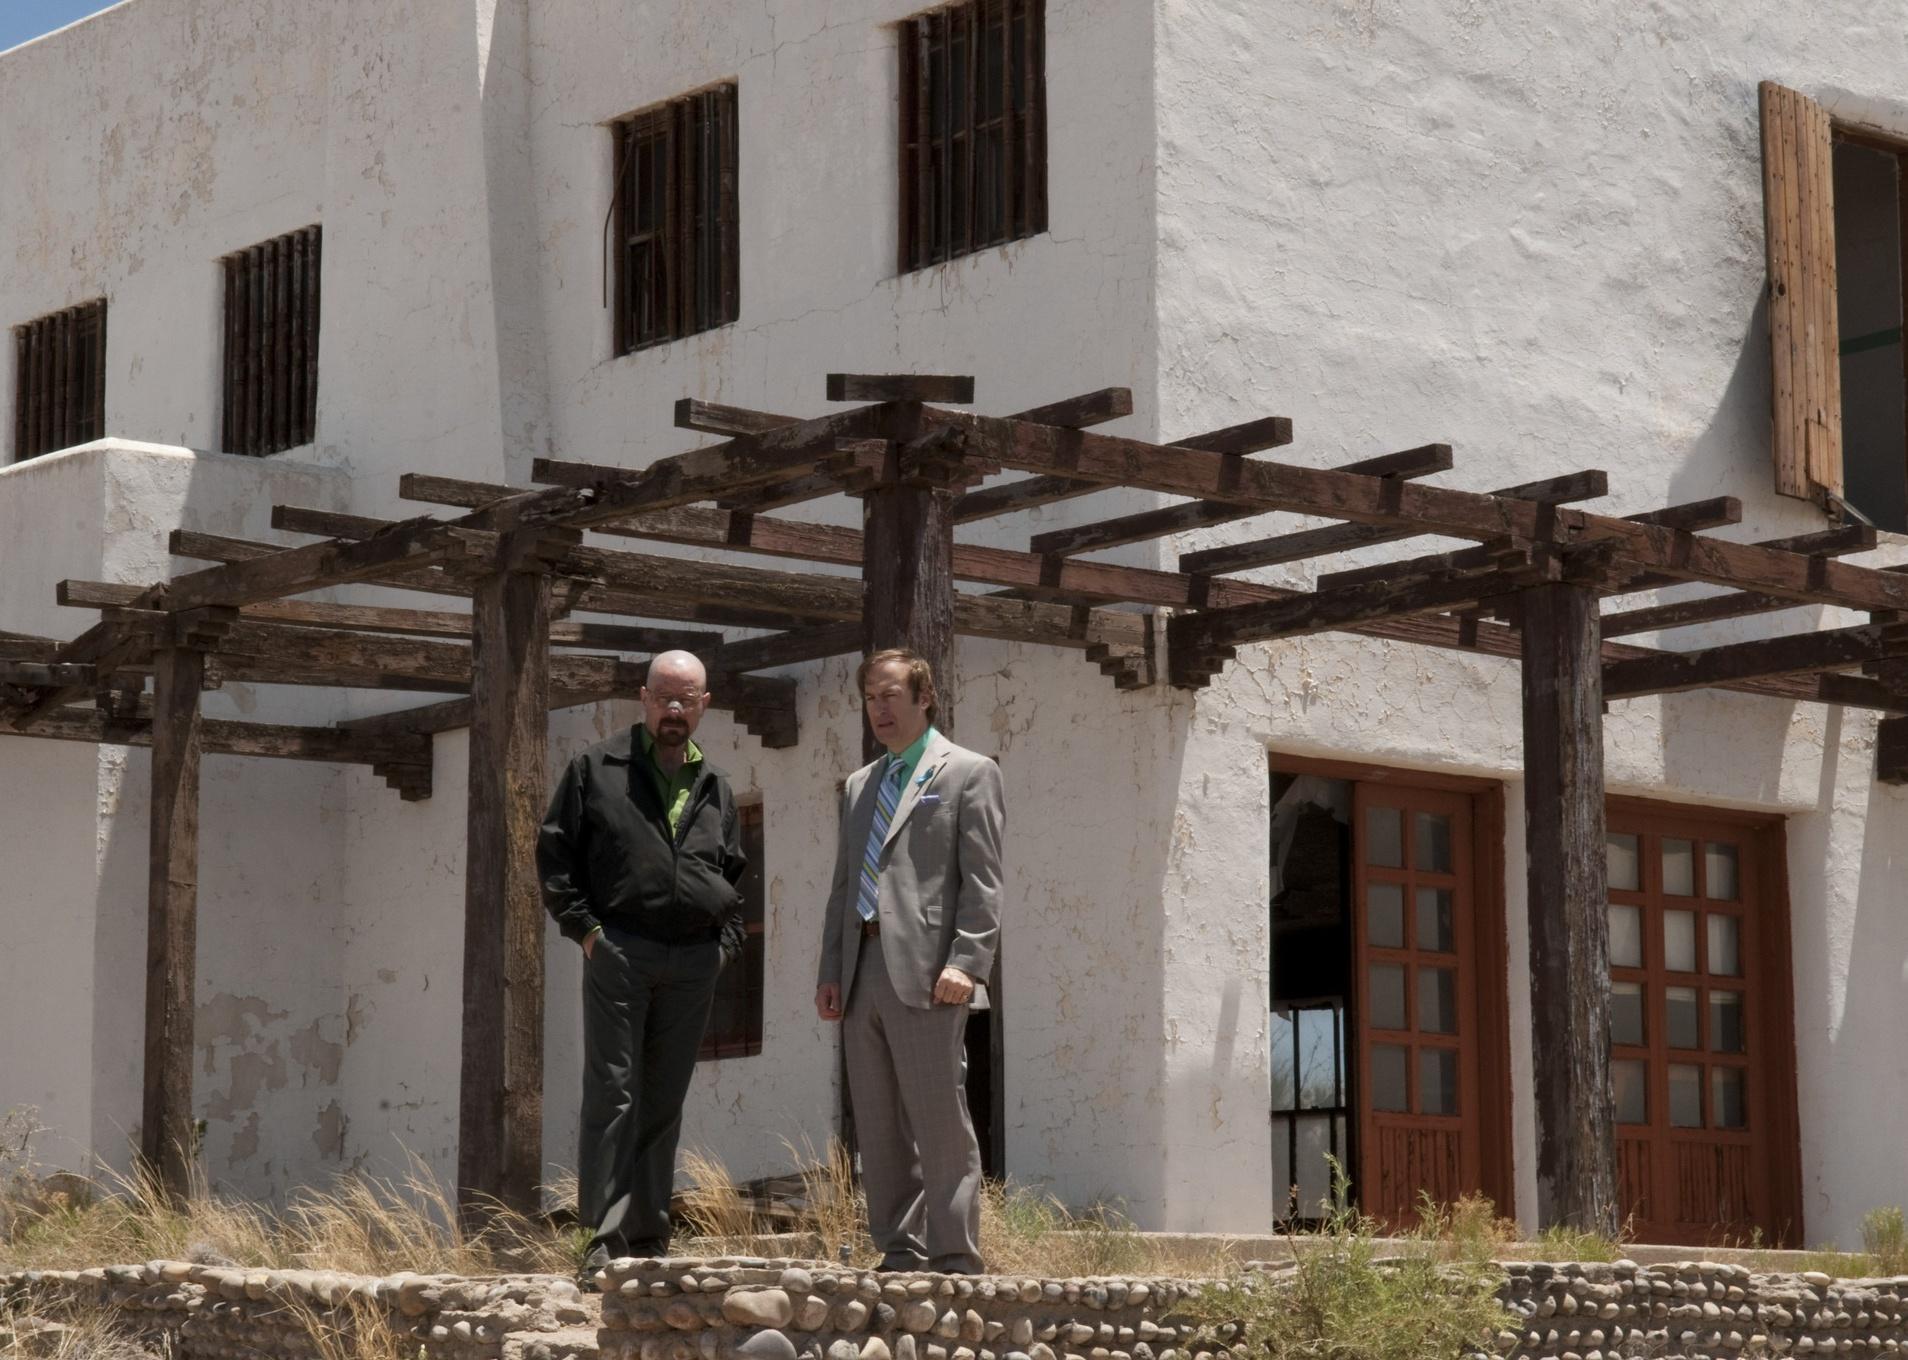 Bryan Cranston and Bob Odenkirk stand in front of a dilapidated stucco and wood home.